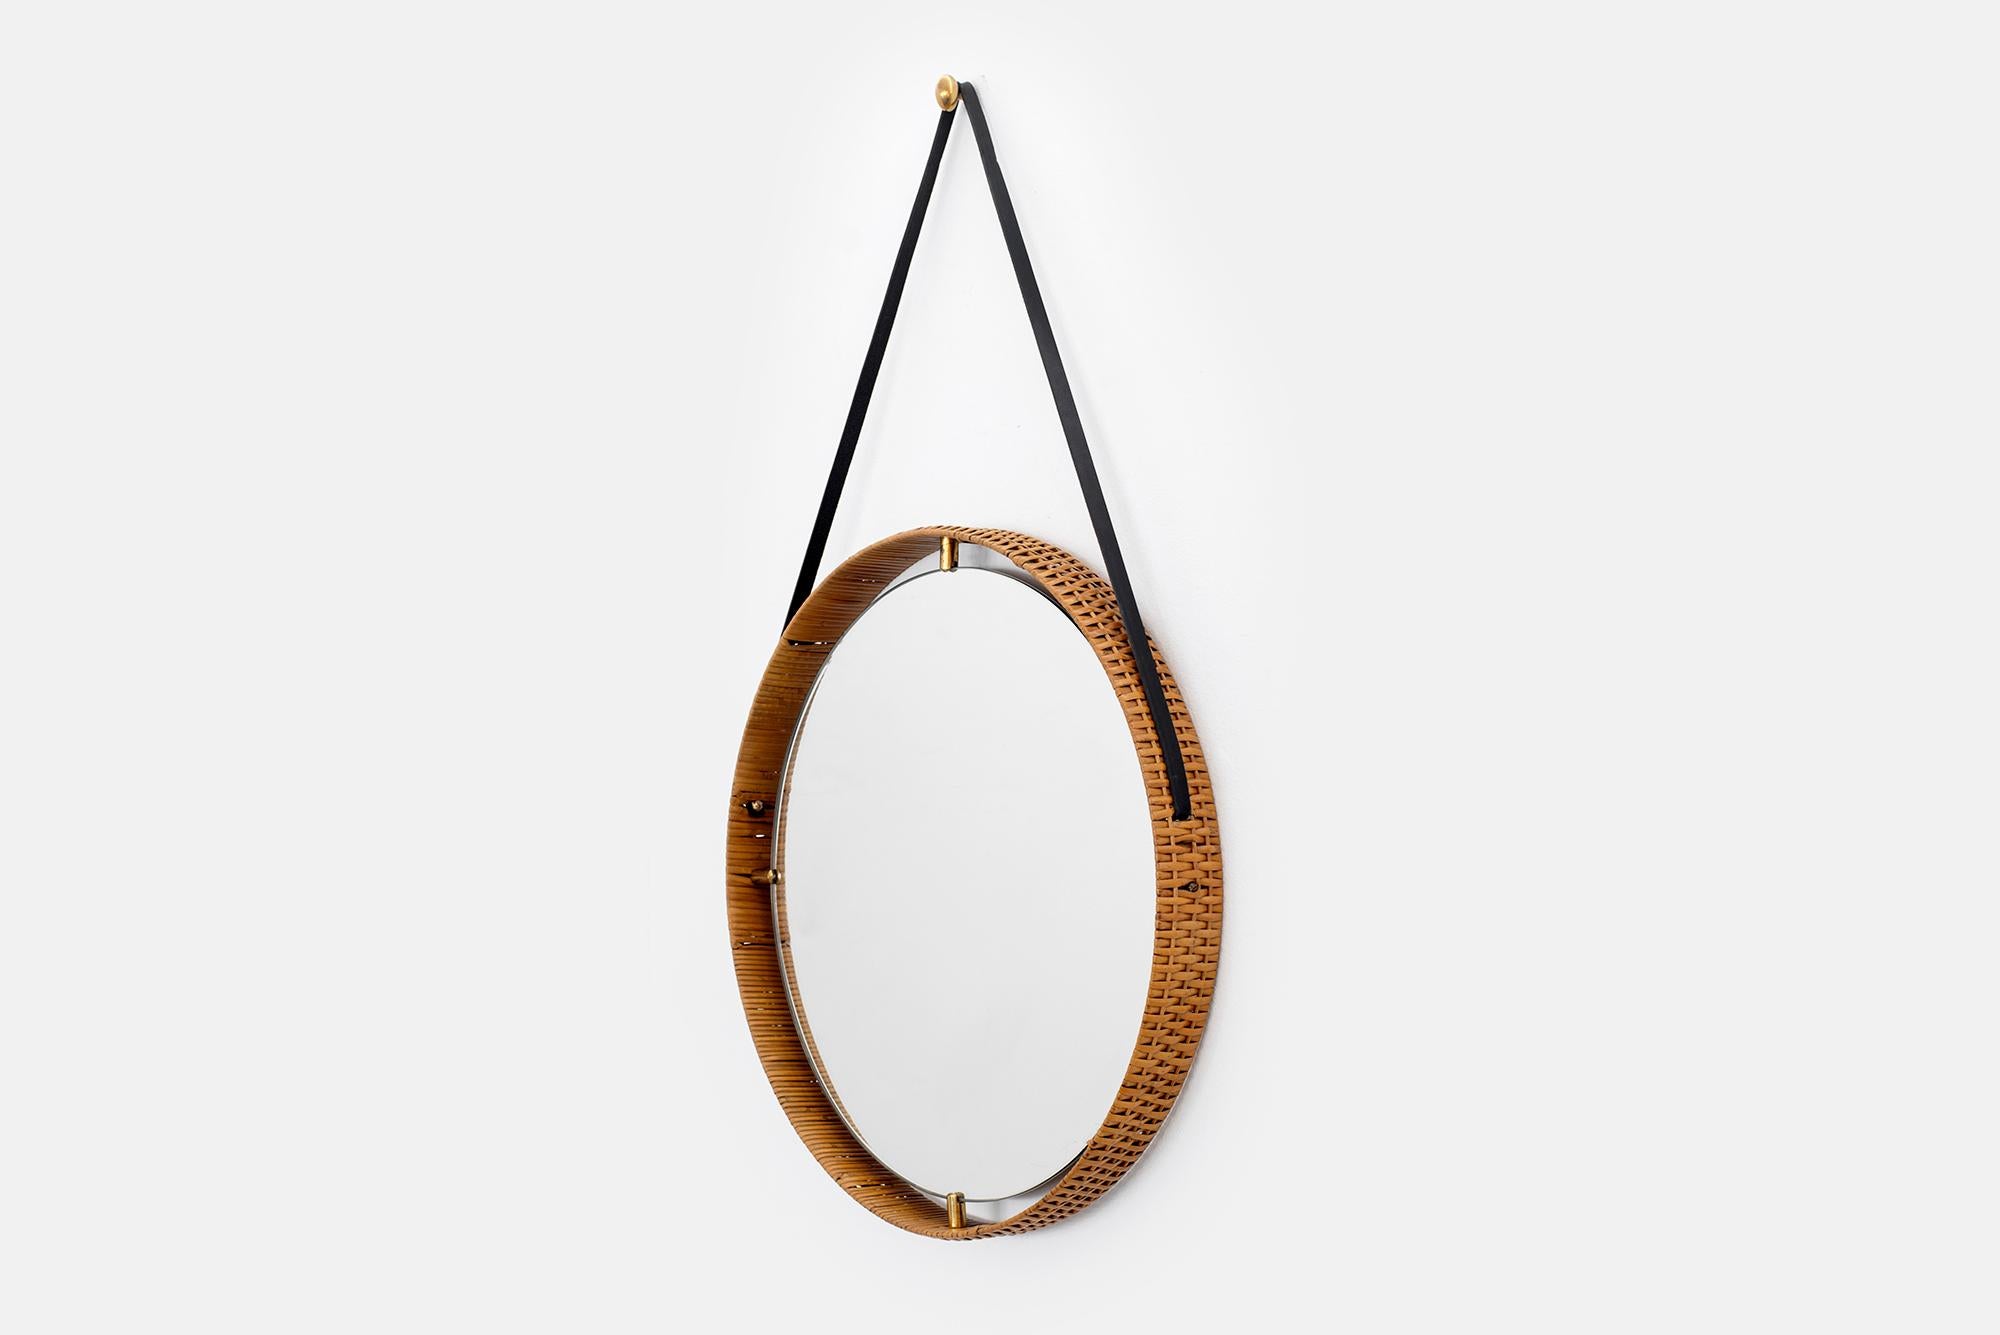 Italian mirror with wrapped wicker frame and brass peg detailing.
Hangs on black leather strap with brass tabs.
36